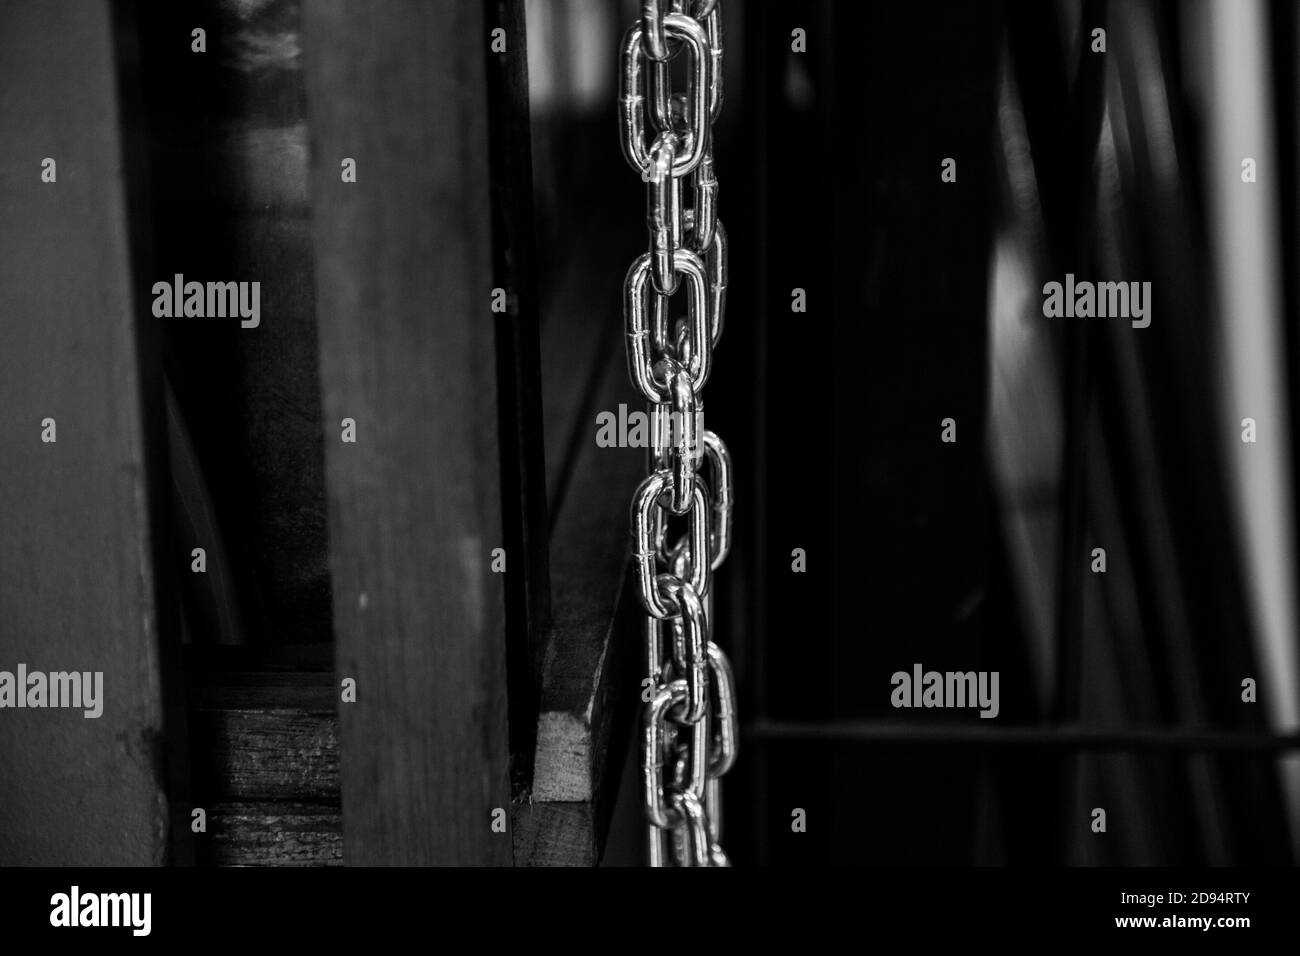 Closeup shot of a chain on dark background Stock Photo